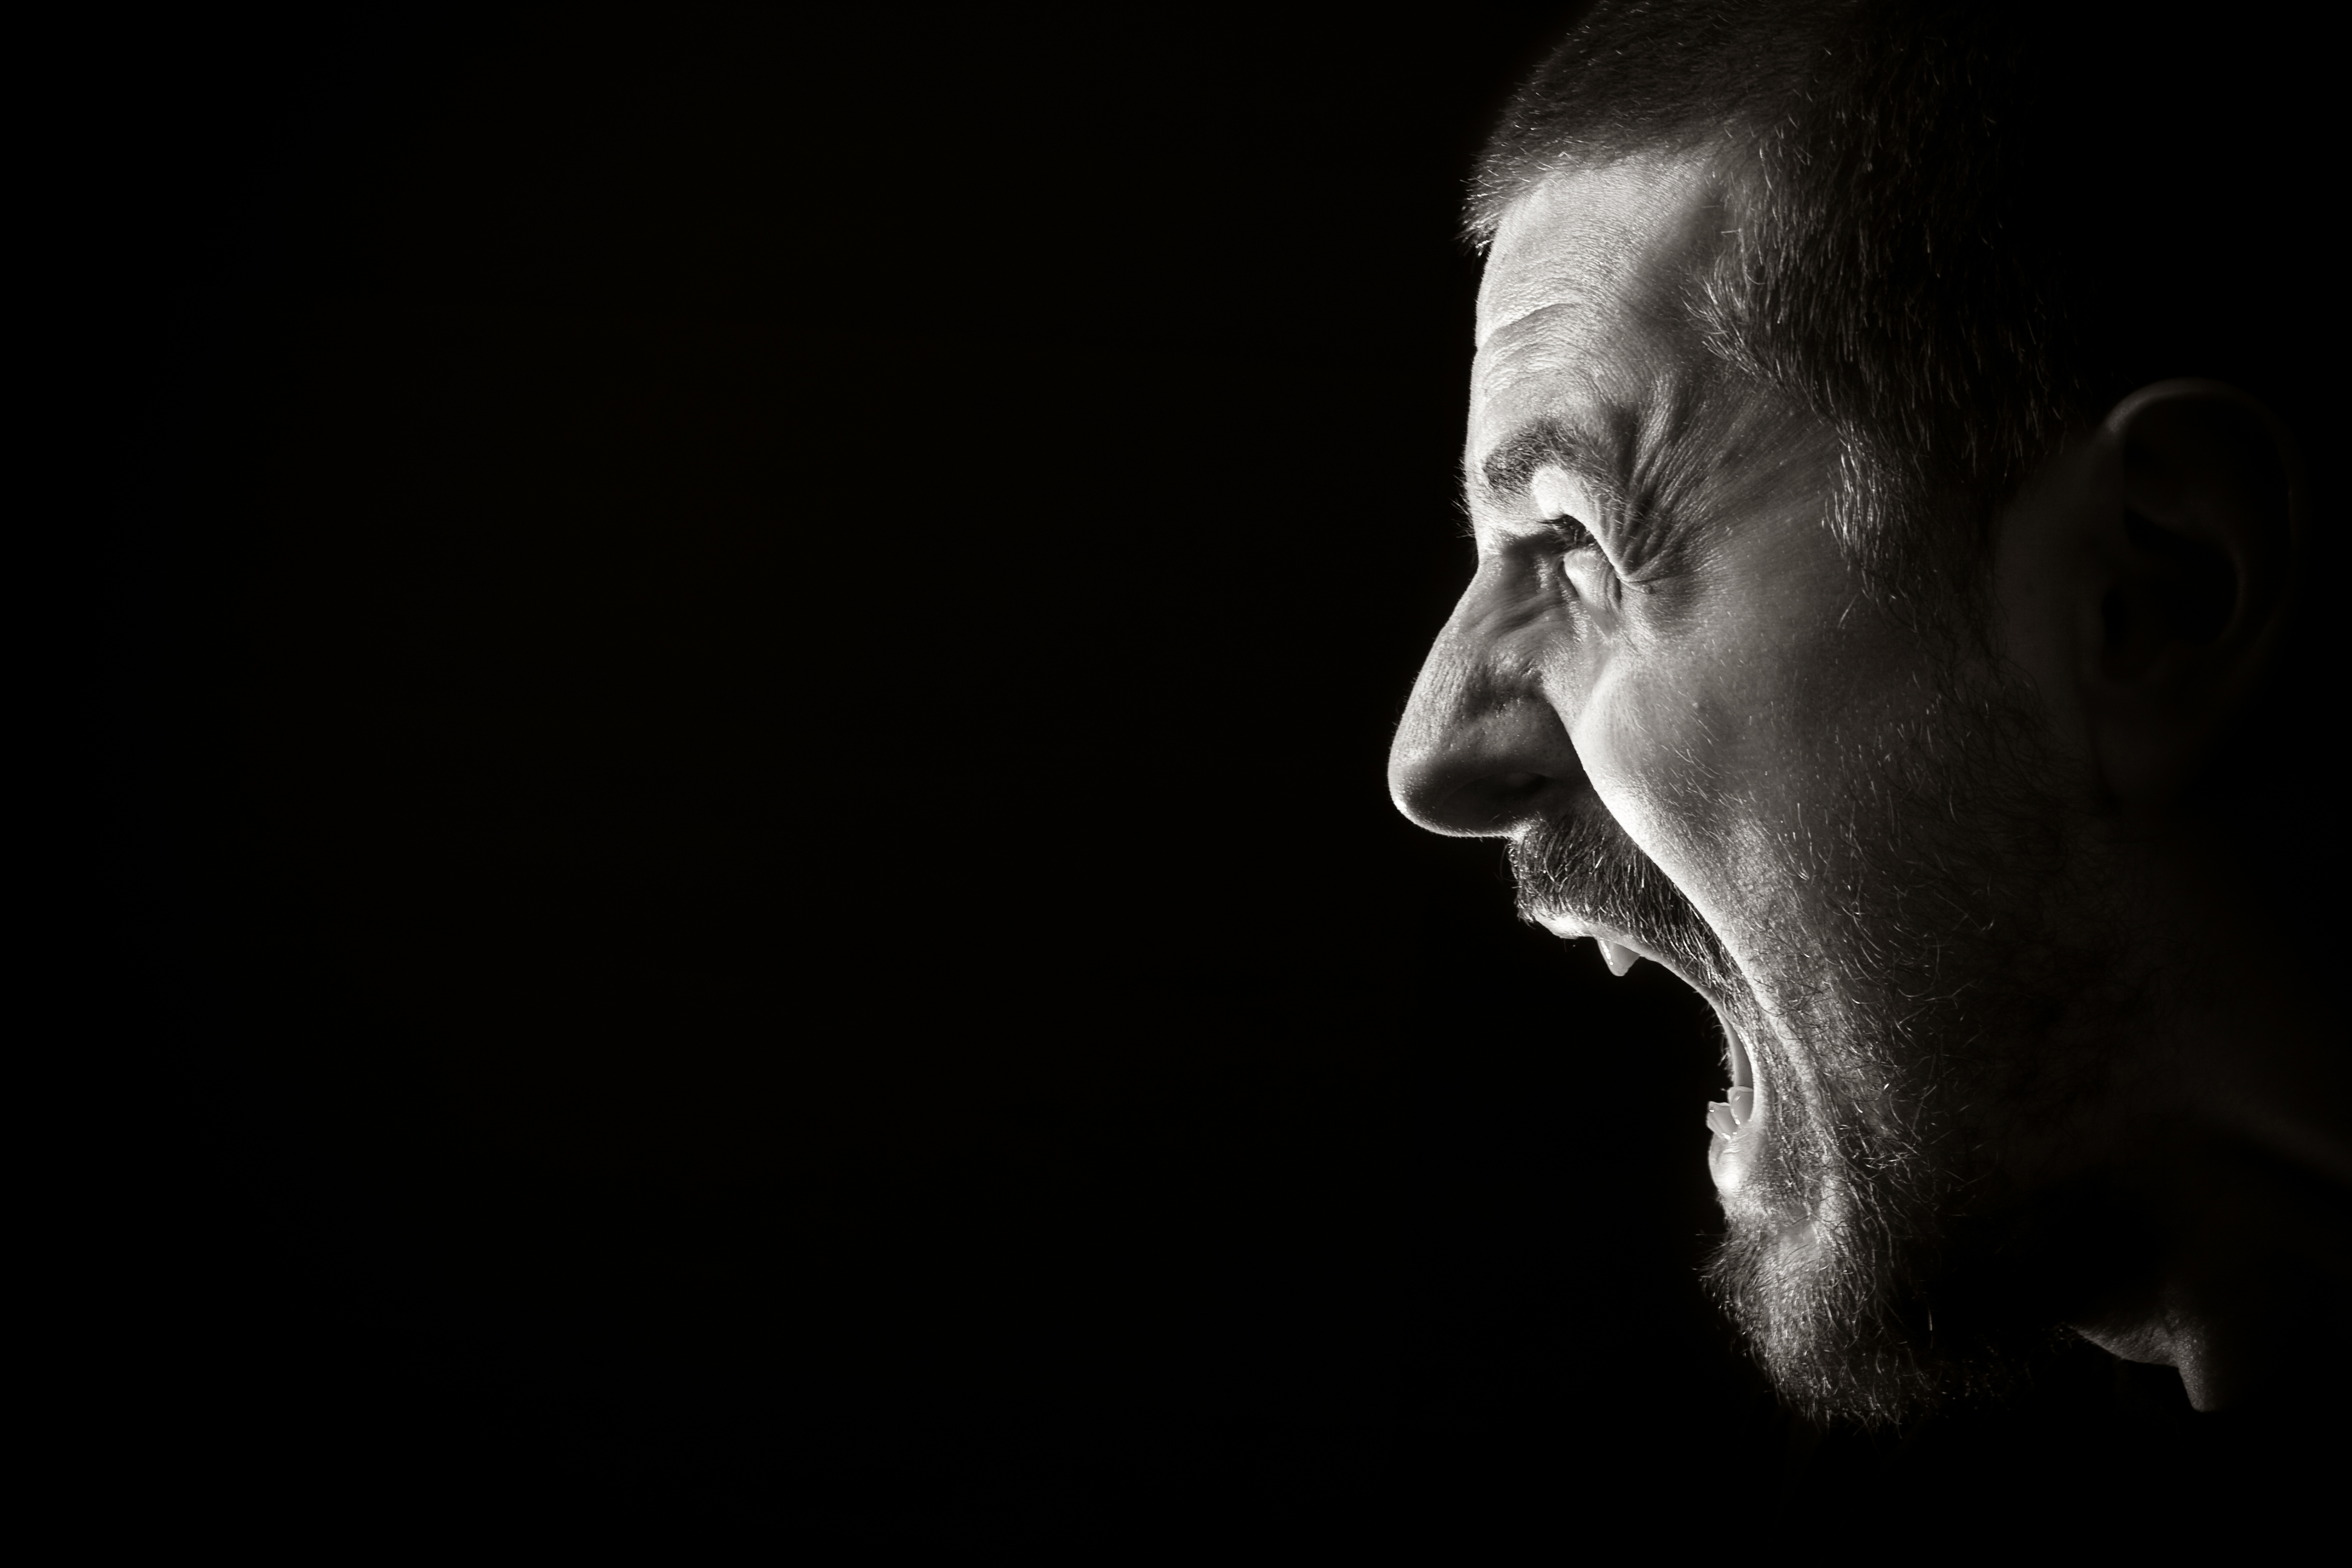 Keep calm and carry on: A guide to curbing your anger